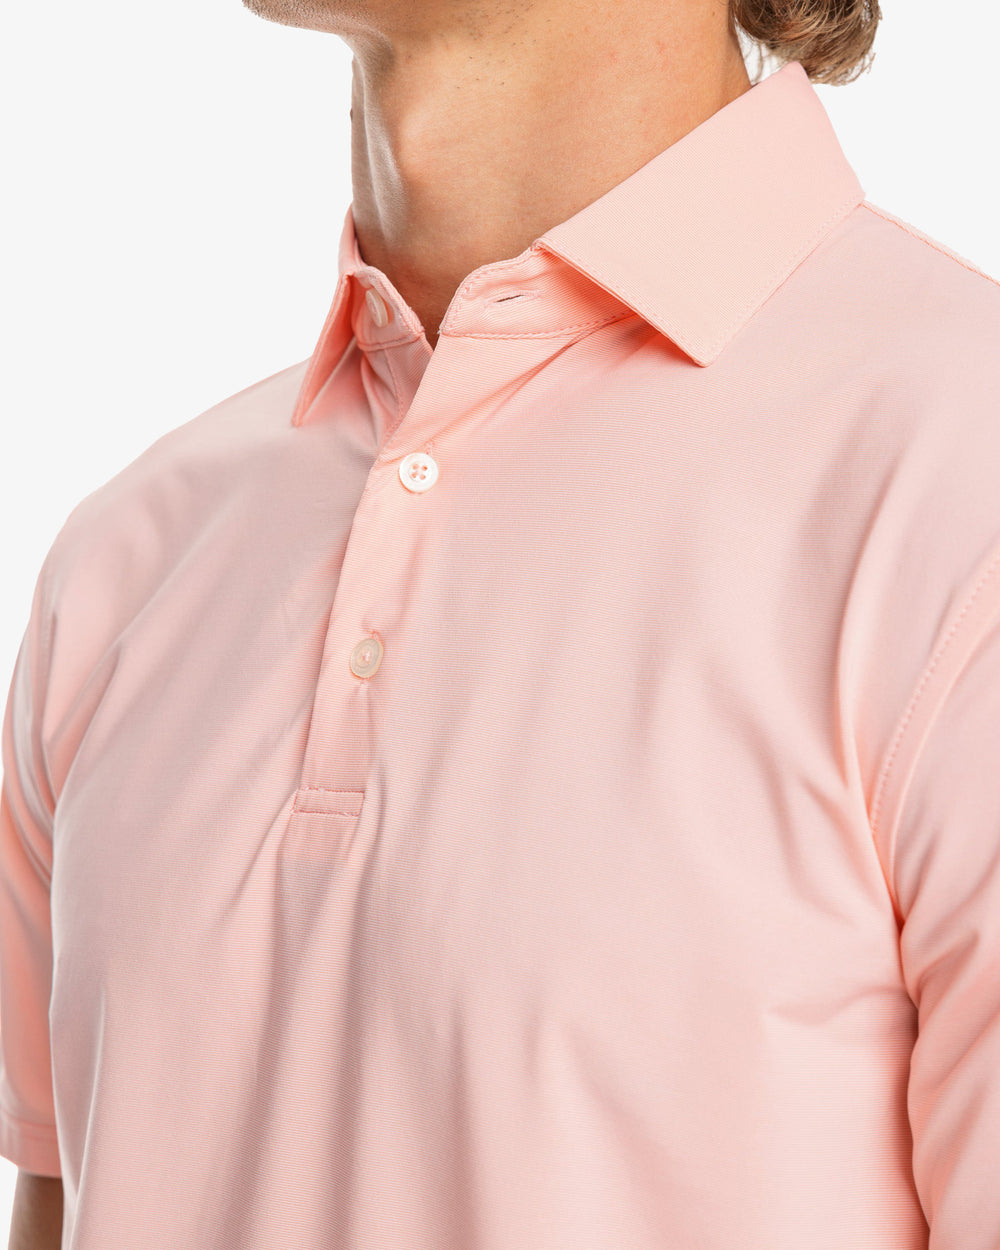 The model detail view of the Men's Sawgrass Stripe brrr°®-eeze Performance Polo Shirt by Southern Tide - Sunbaked Sand